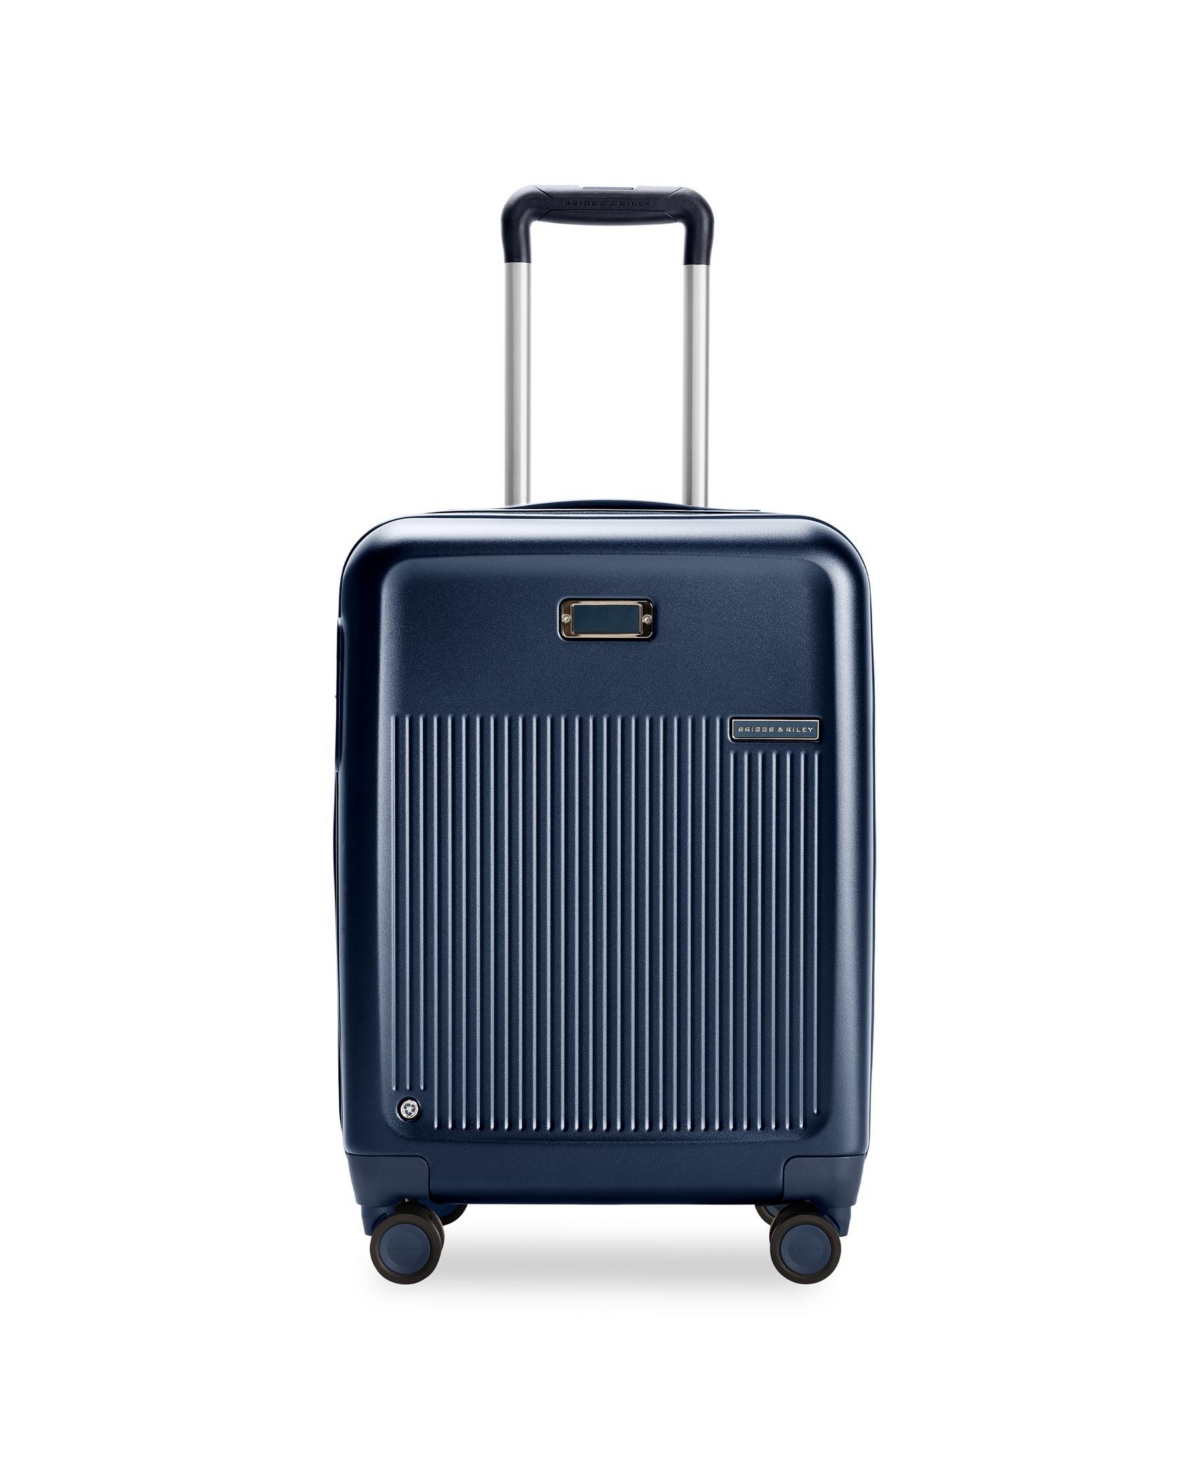 Briggs & Riley Sympatico 3.0 Global Carry-on Expandable Spinner In Navy